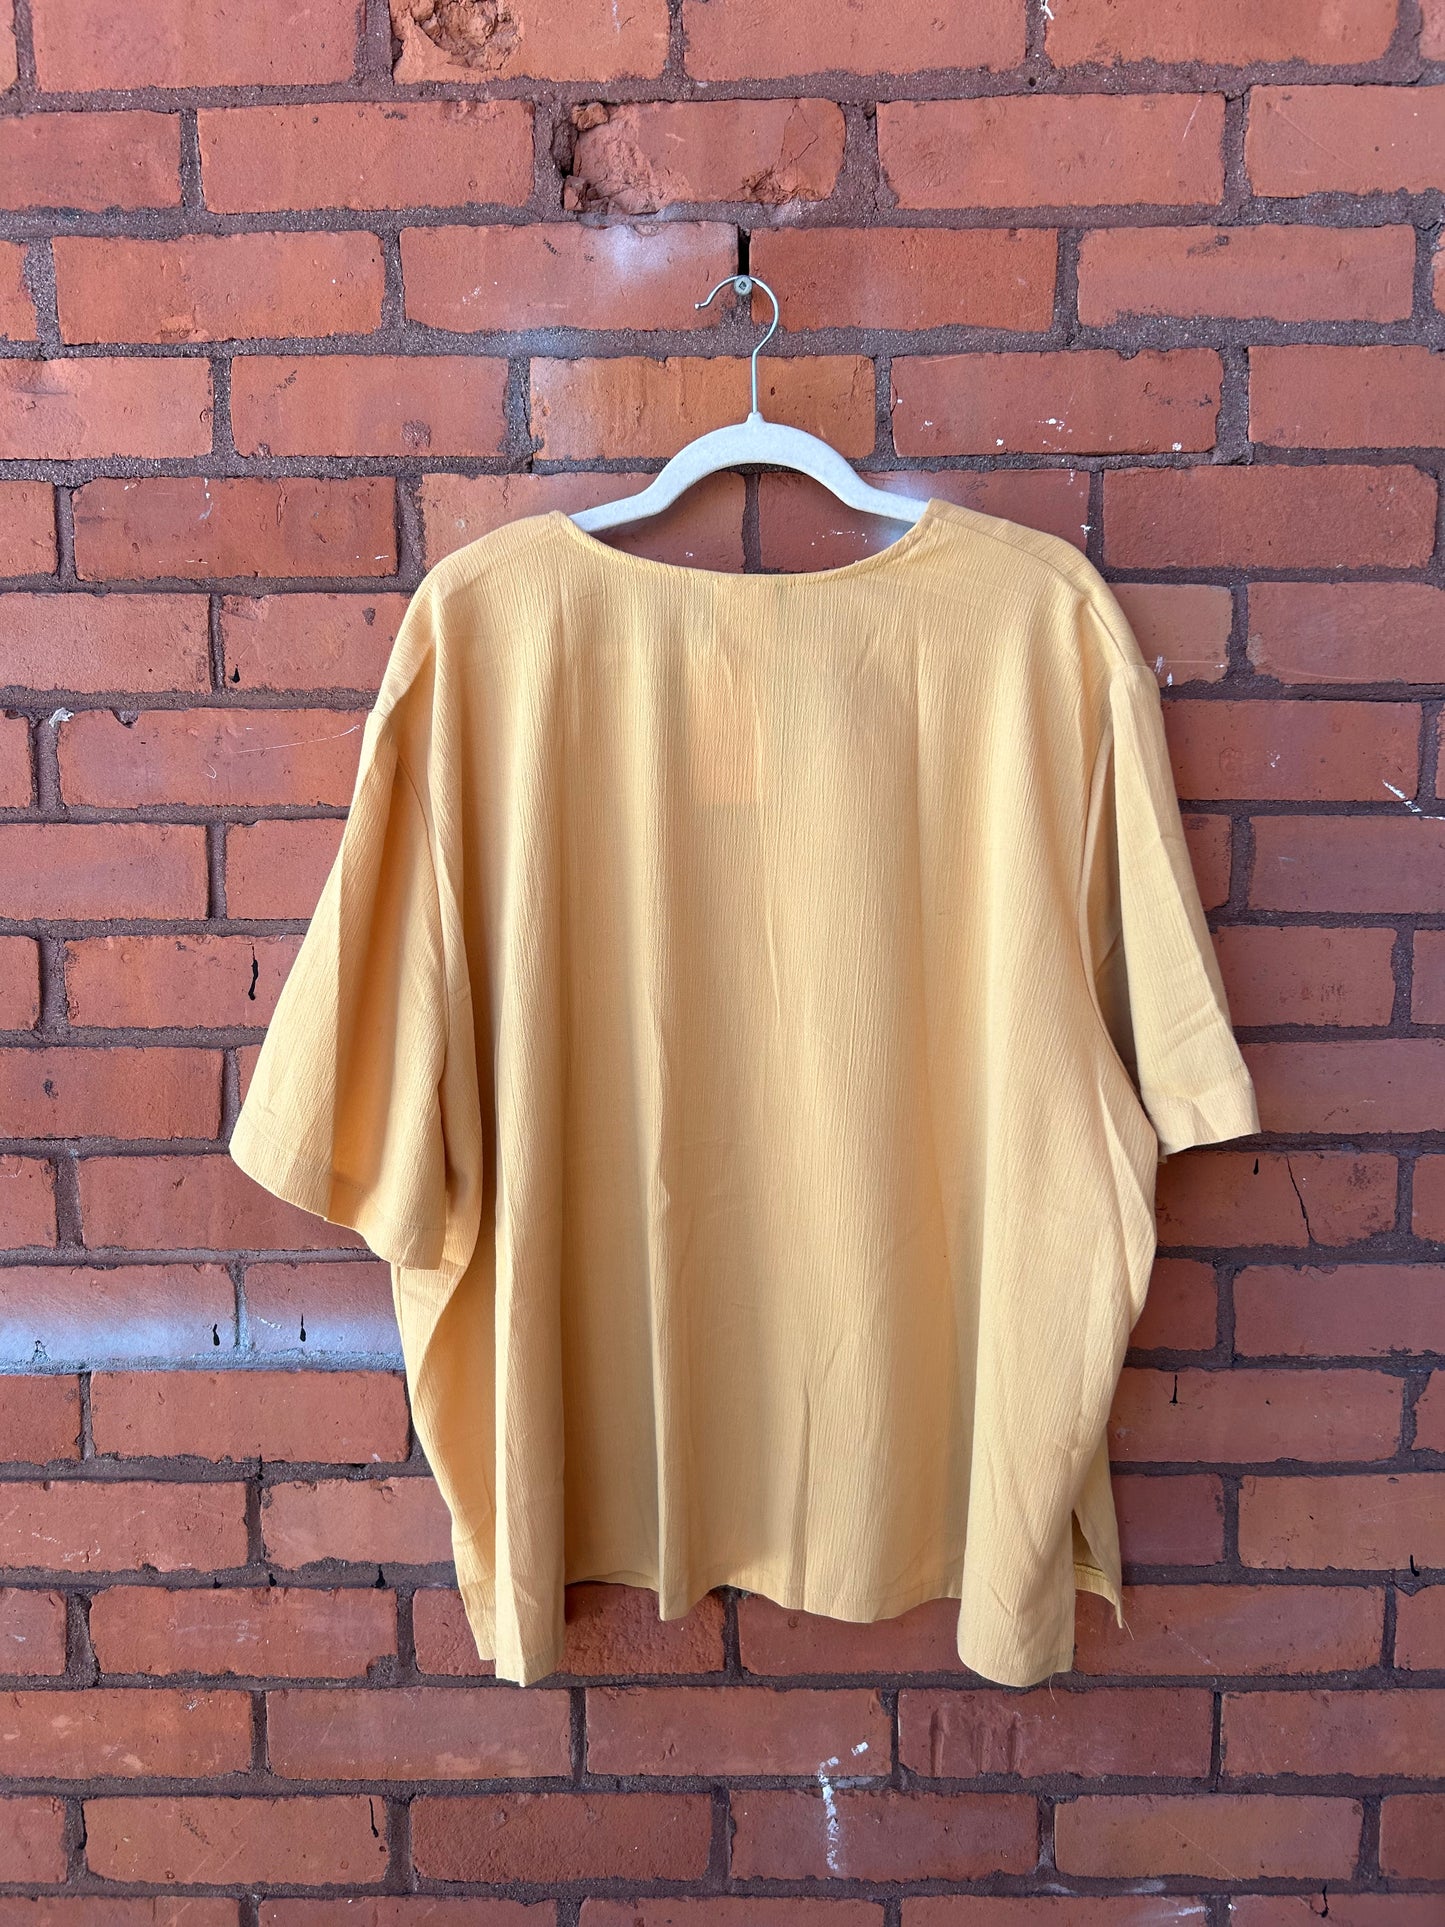 90’s Vintage Sunny Yellow Button Down Blouse / Size 3X